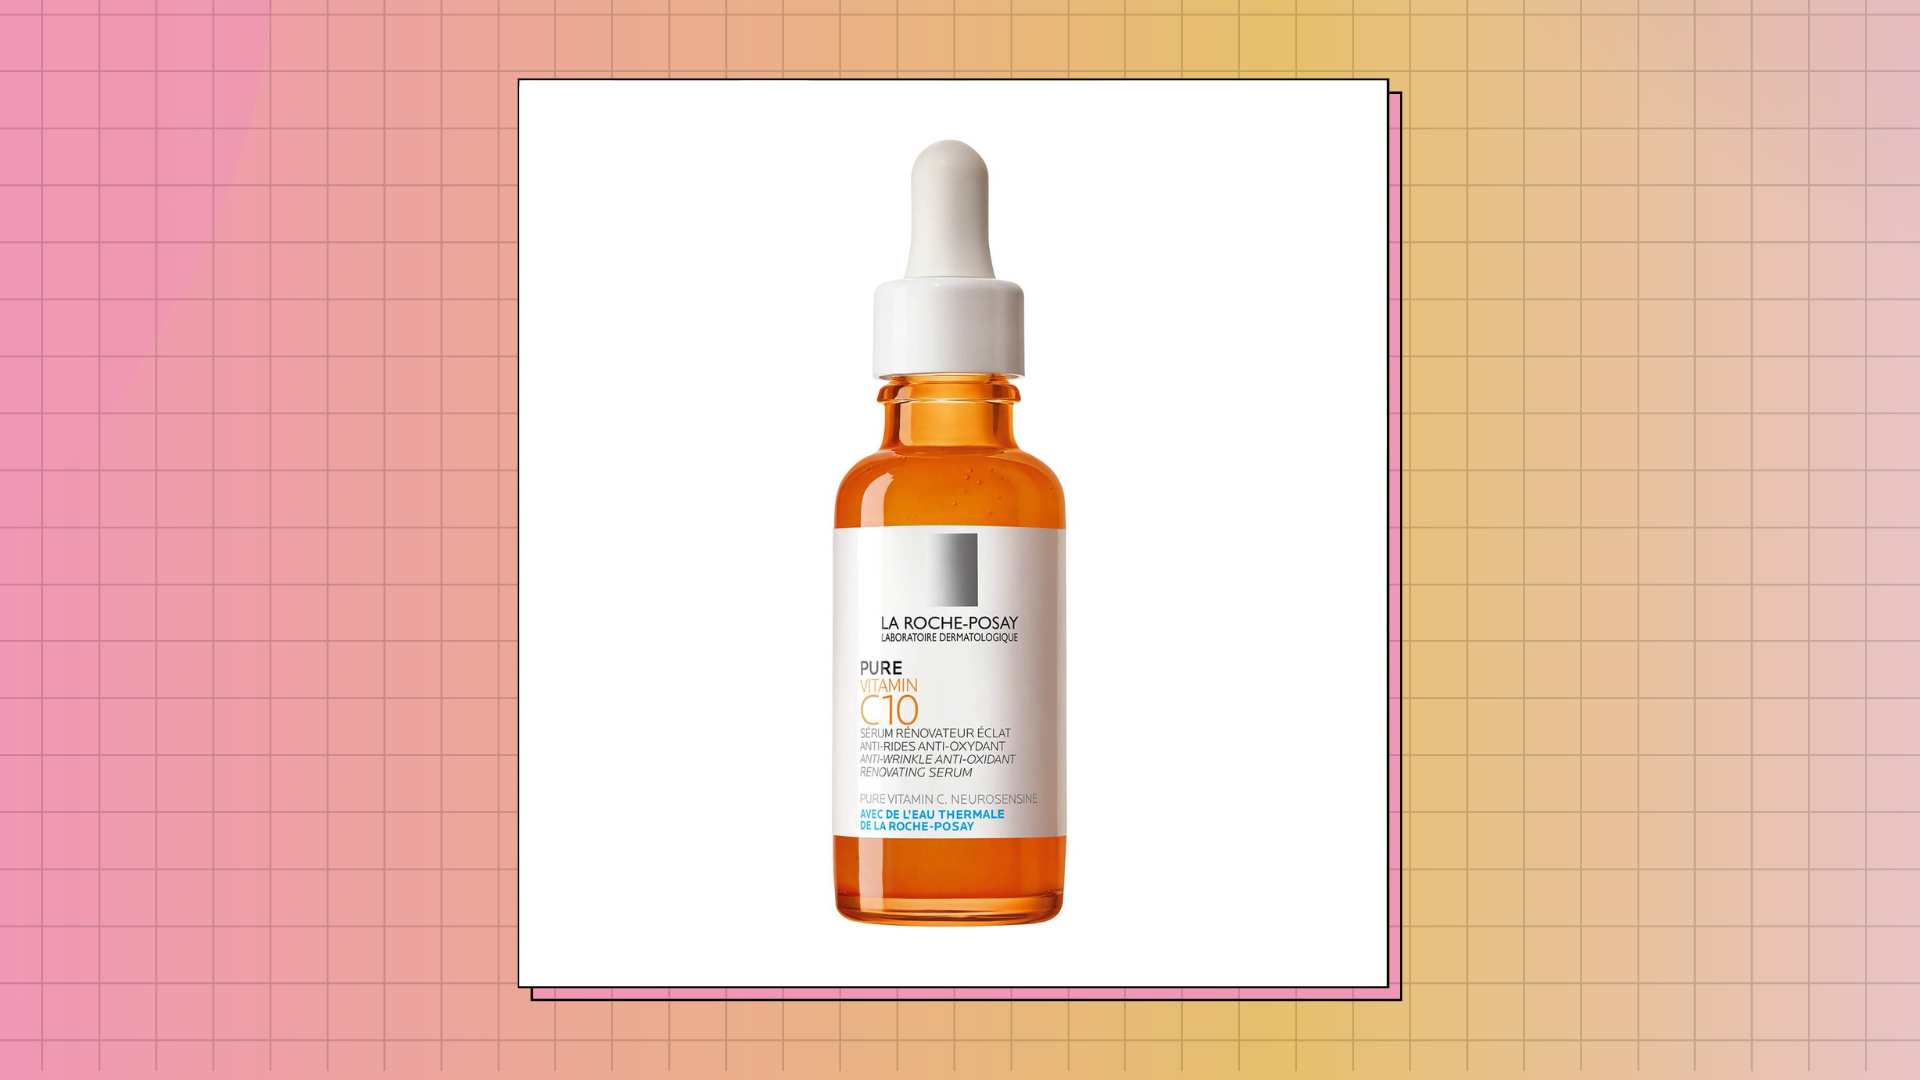 Alabama Fancy kjole Arbejdsgiver La Roche-Posay Pure Vitamin C10 Serum review: we try it | My Imperfect Life